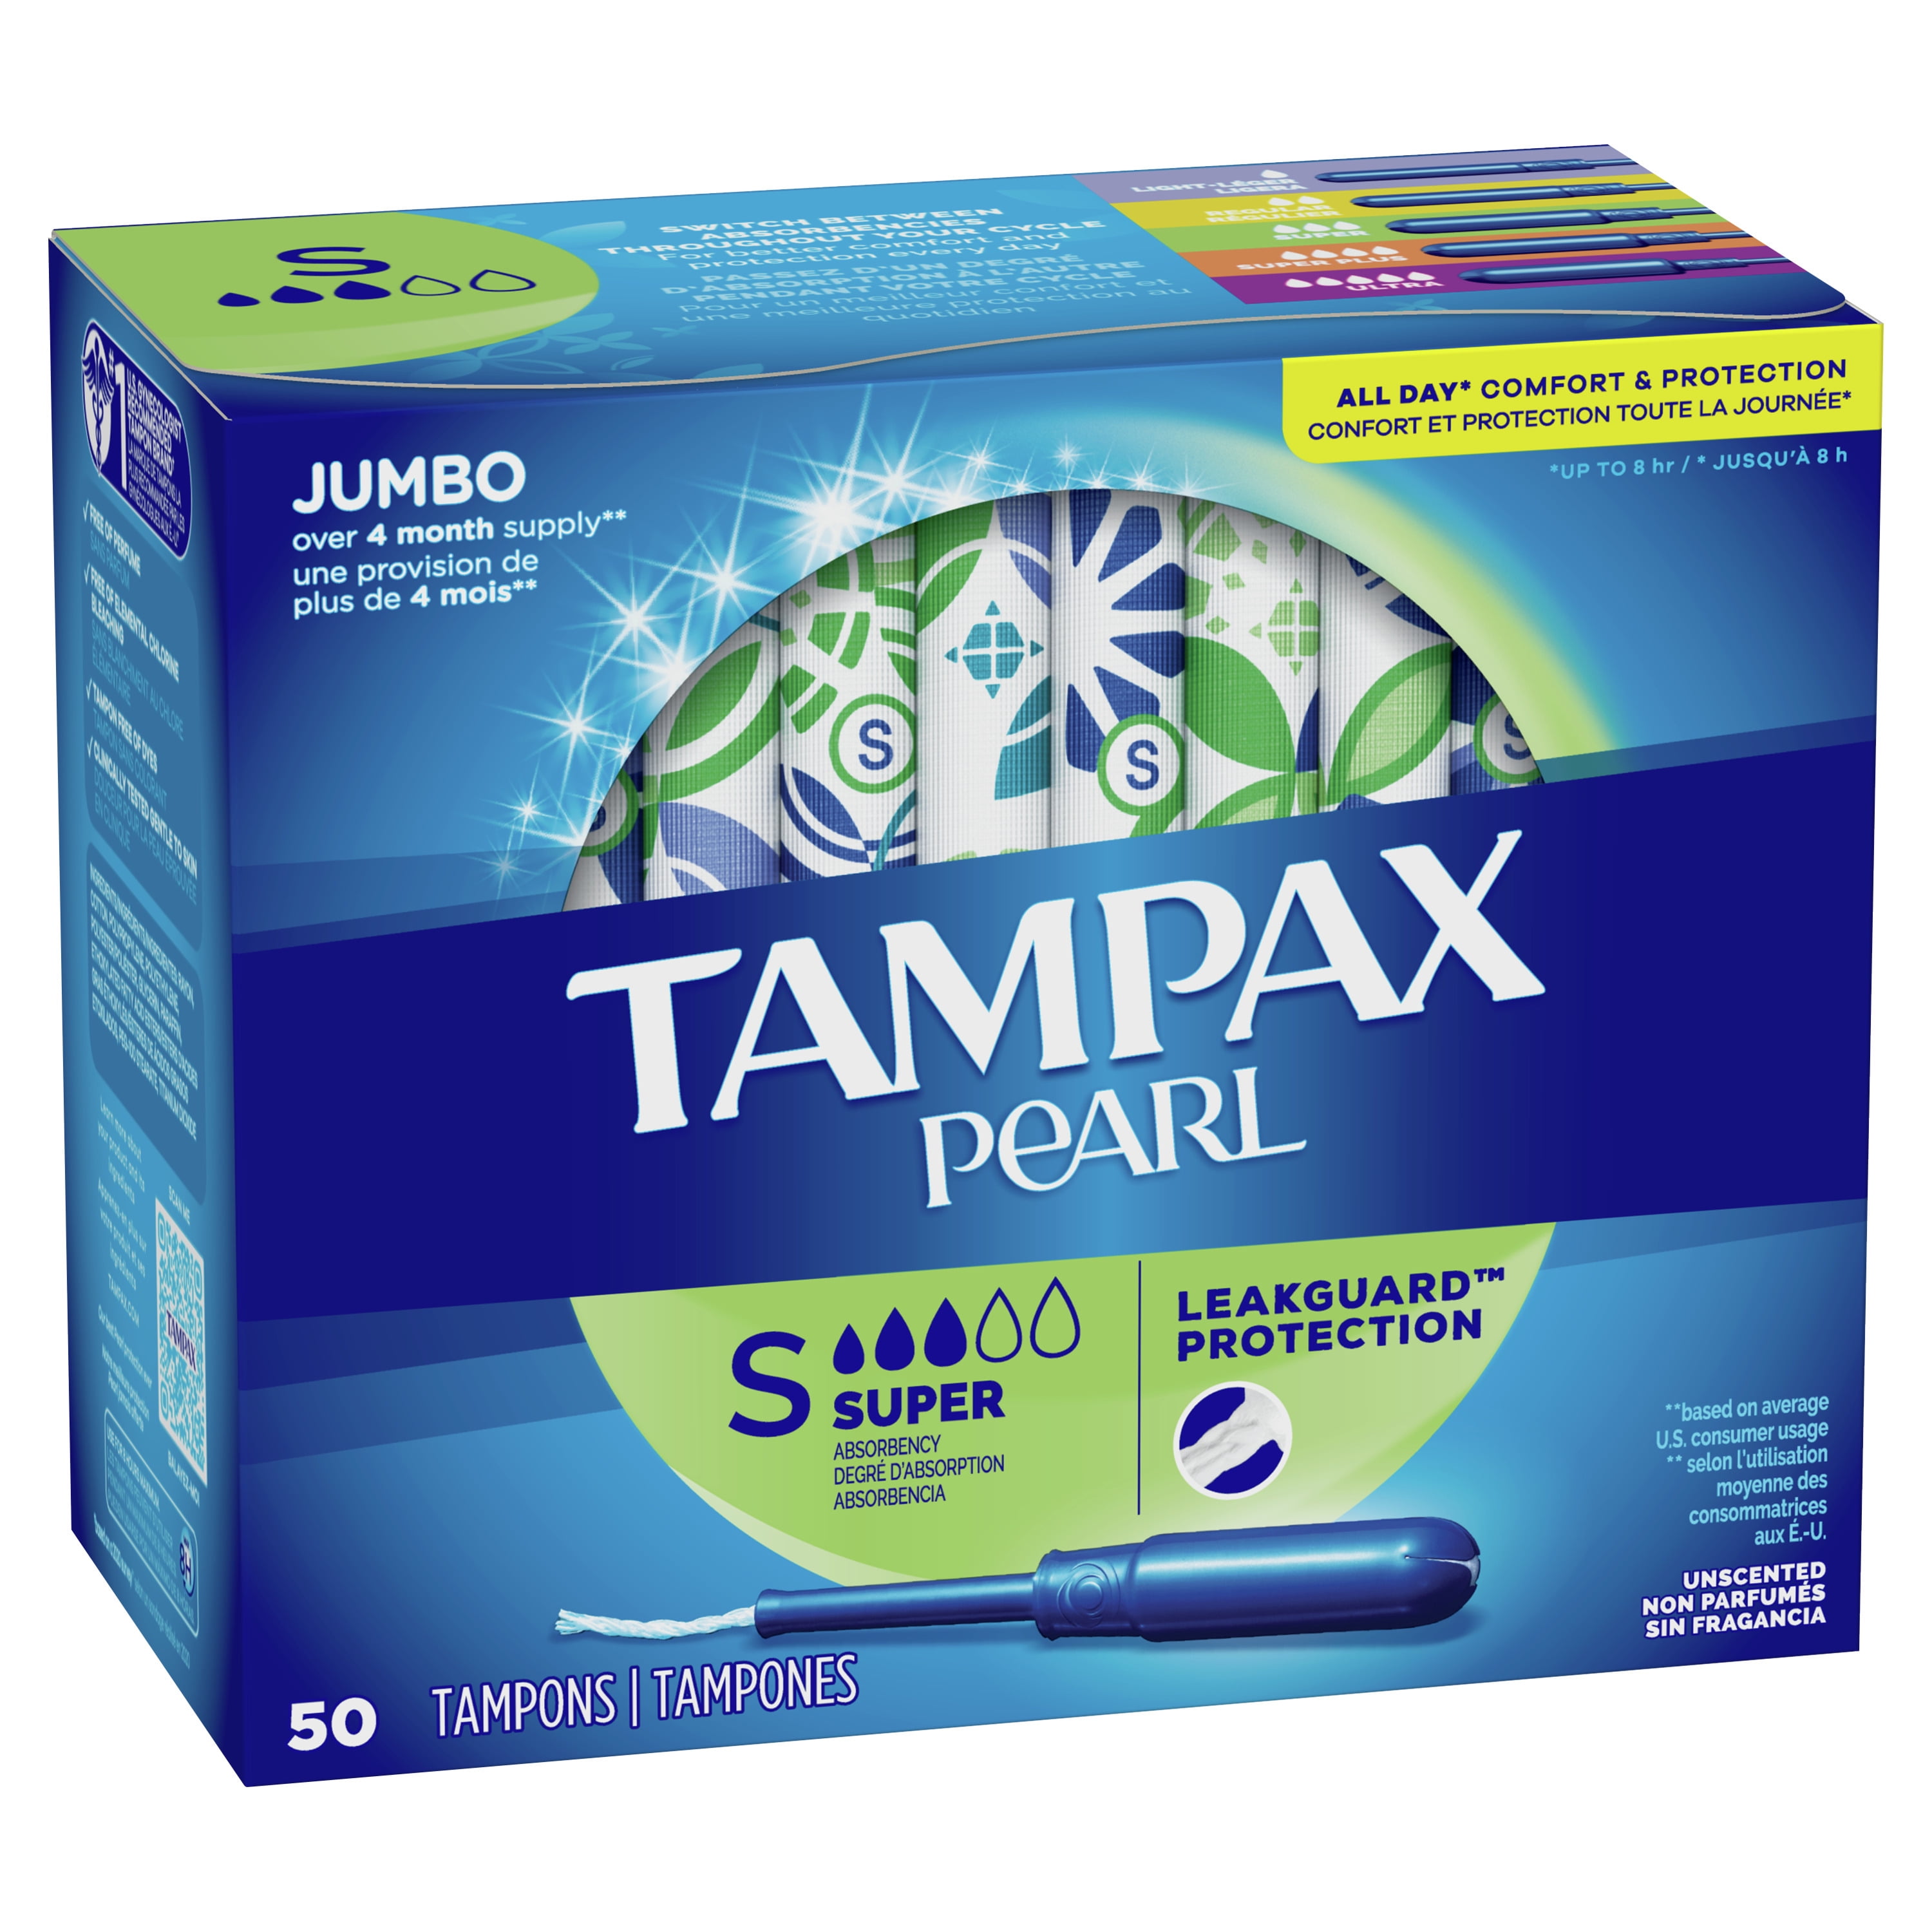 Tampax Pearl Tampons with LeakGuard Braid, Super Absorbency, 36 Ct 